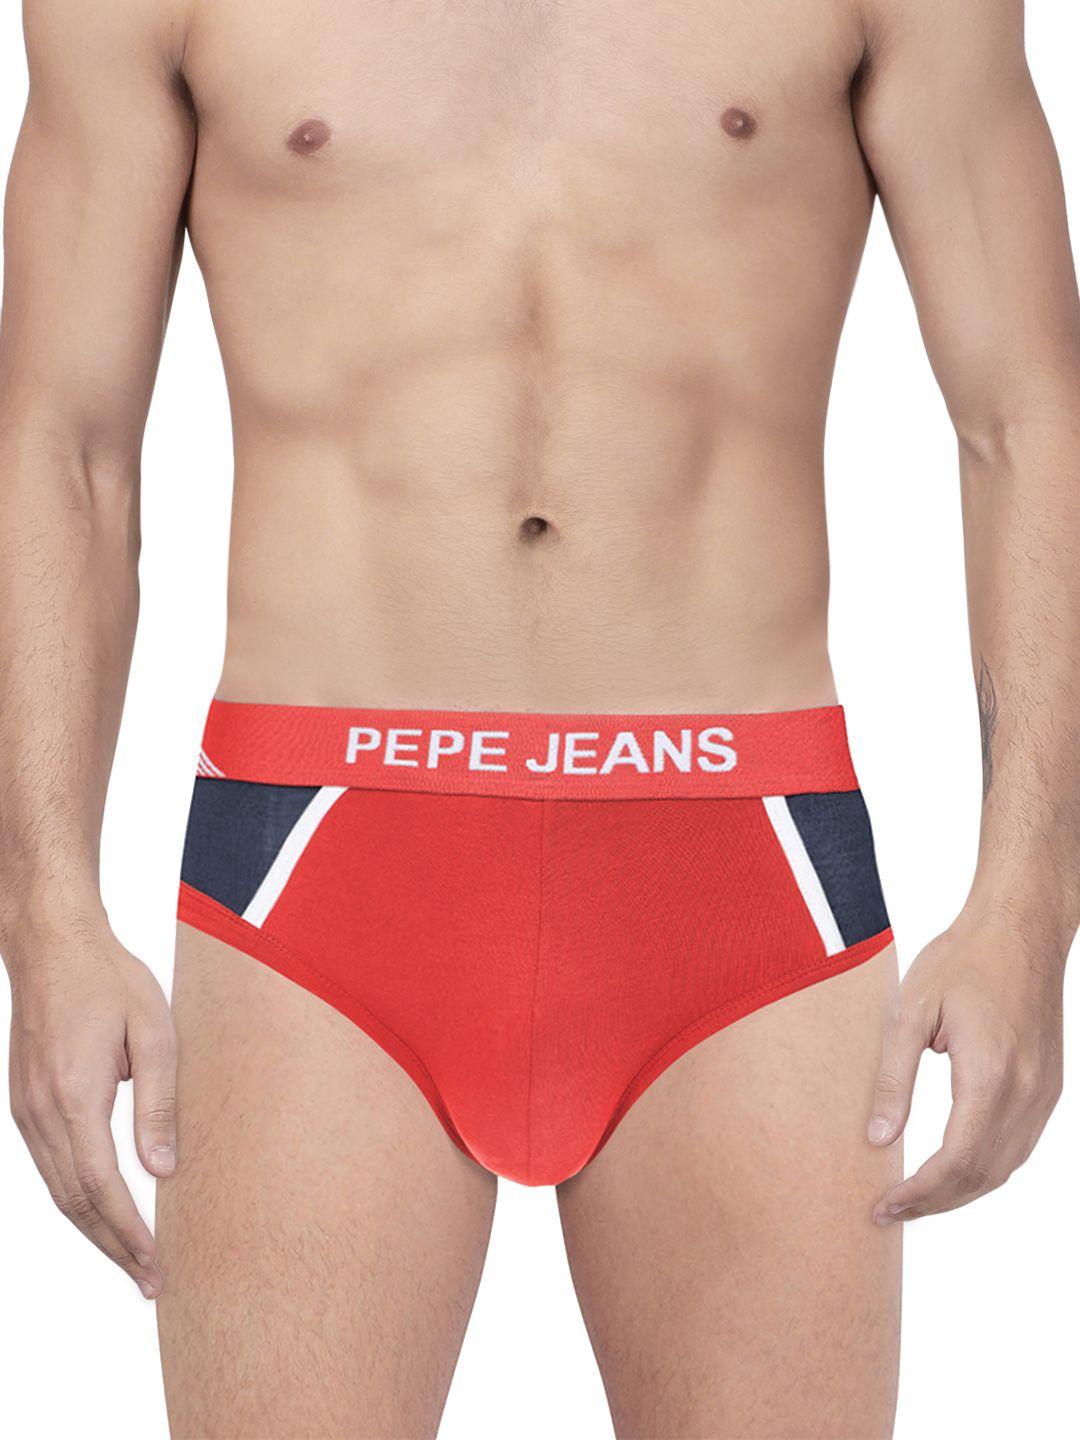 pepe jeans men red & navy blue colourblocked briefs 8904311303831